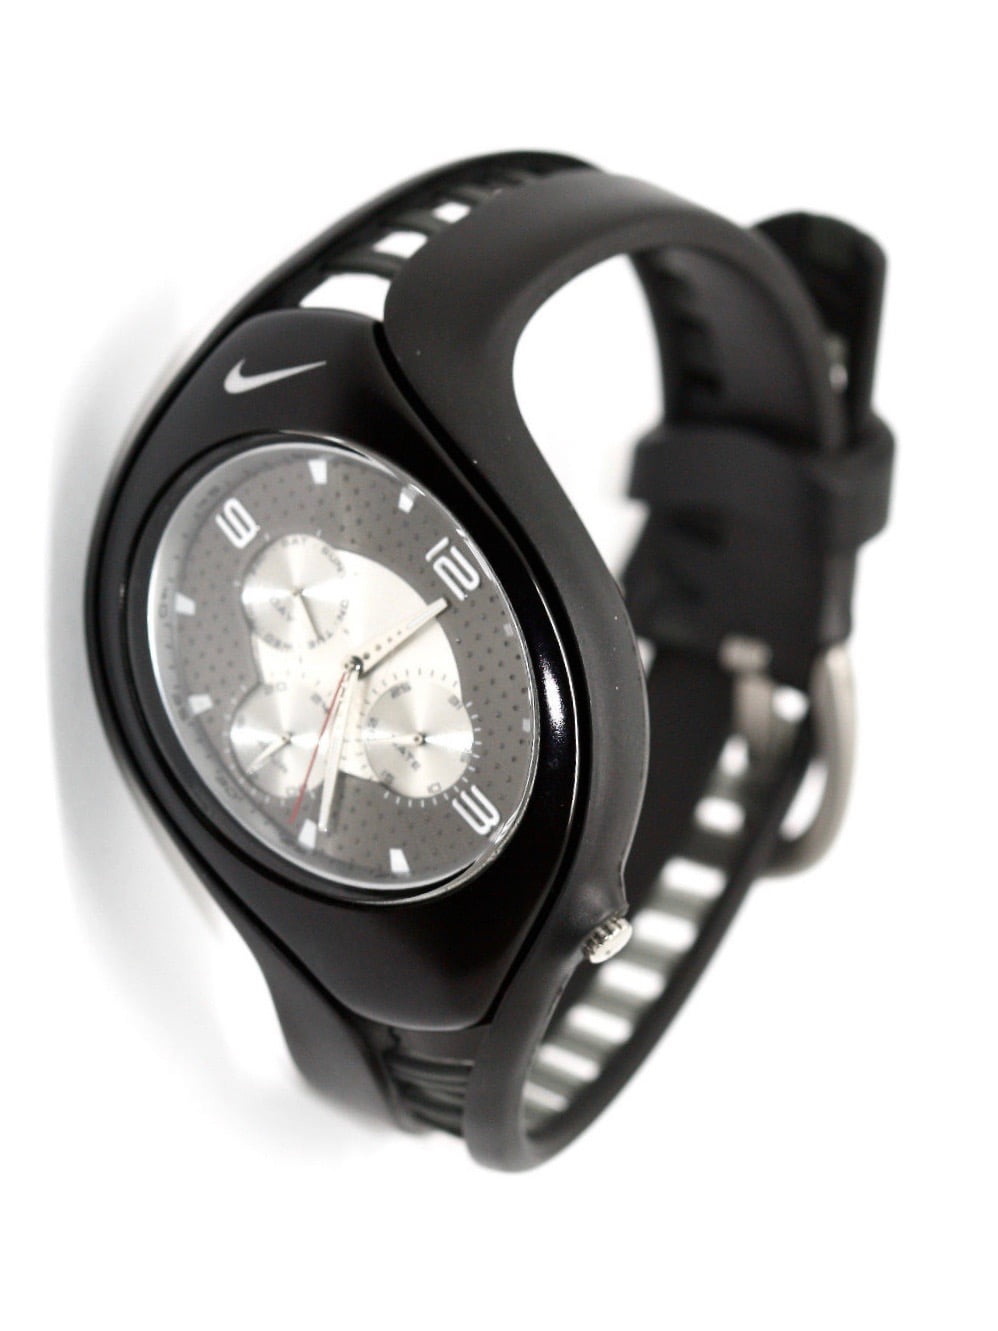 nike watches for youth